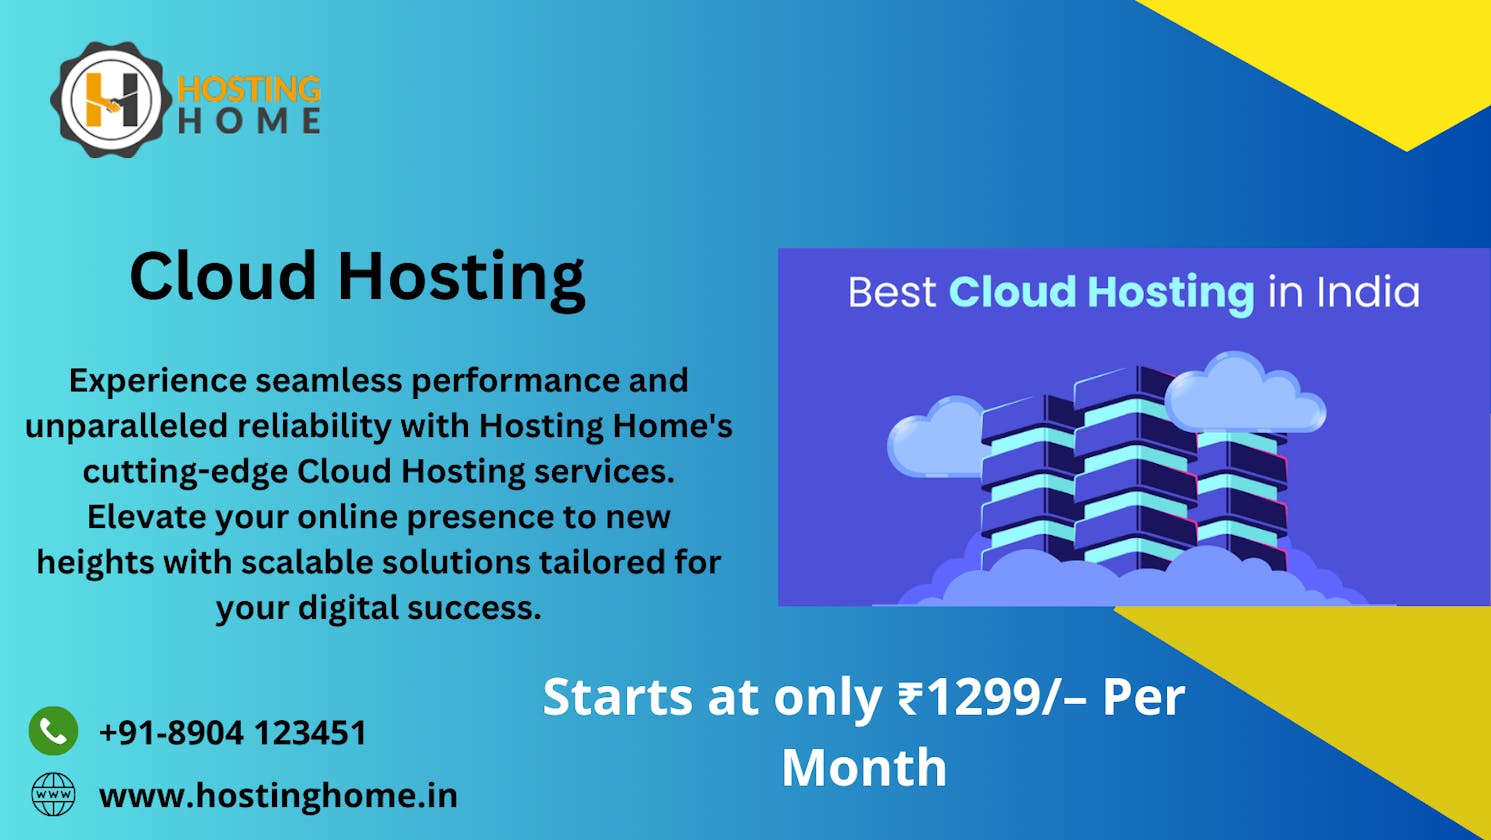 Cloud Hosting with Hosting Home: Unleashing the Power of Scalability and Flexibility